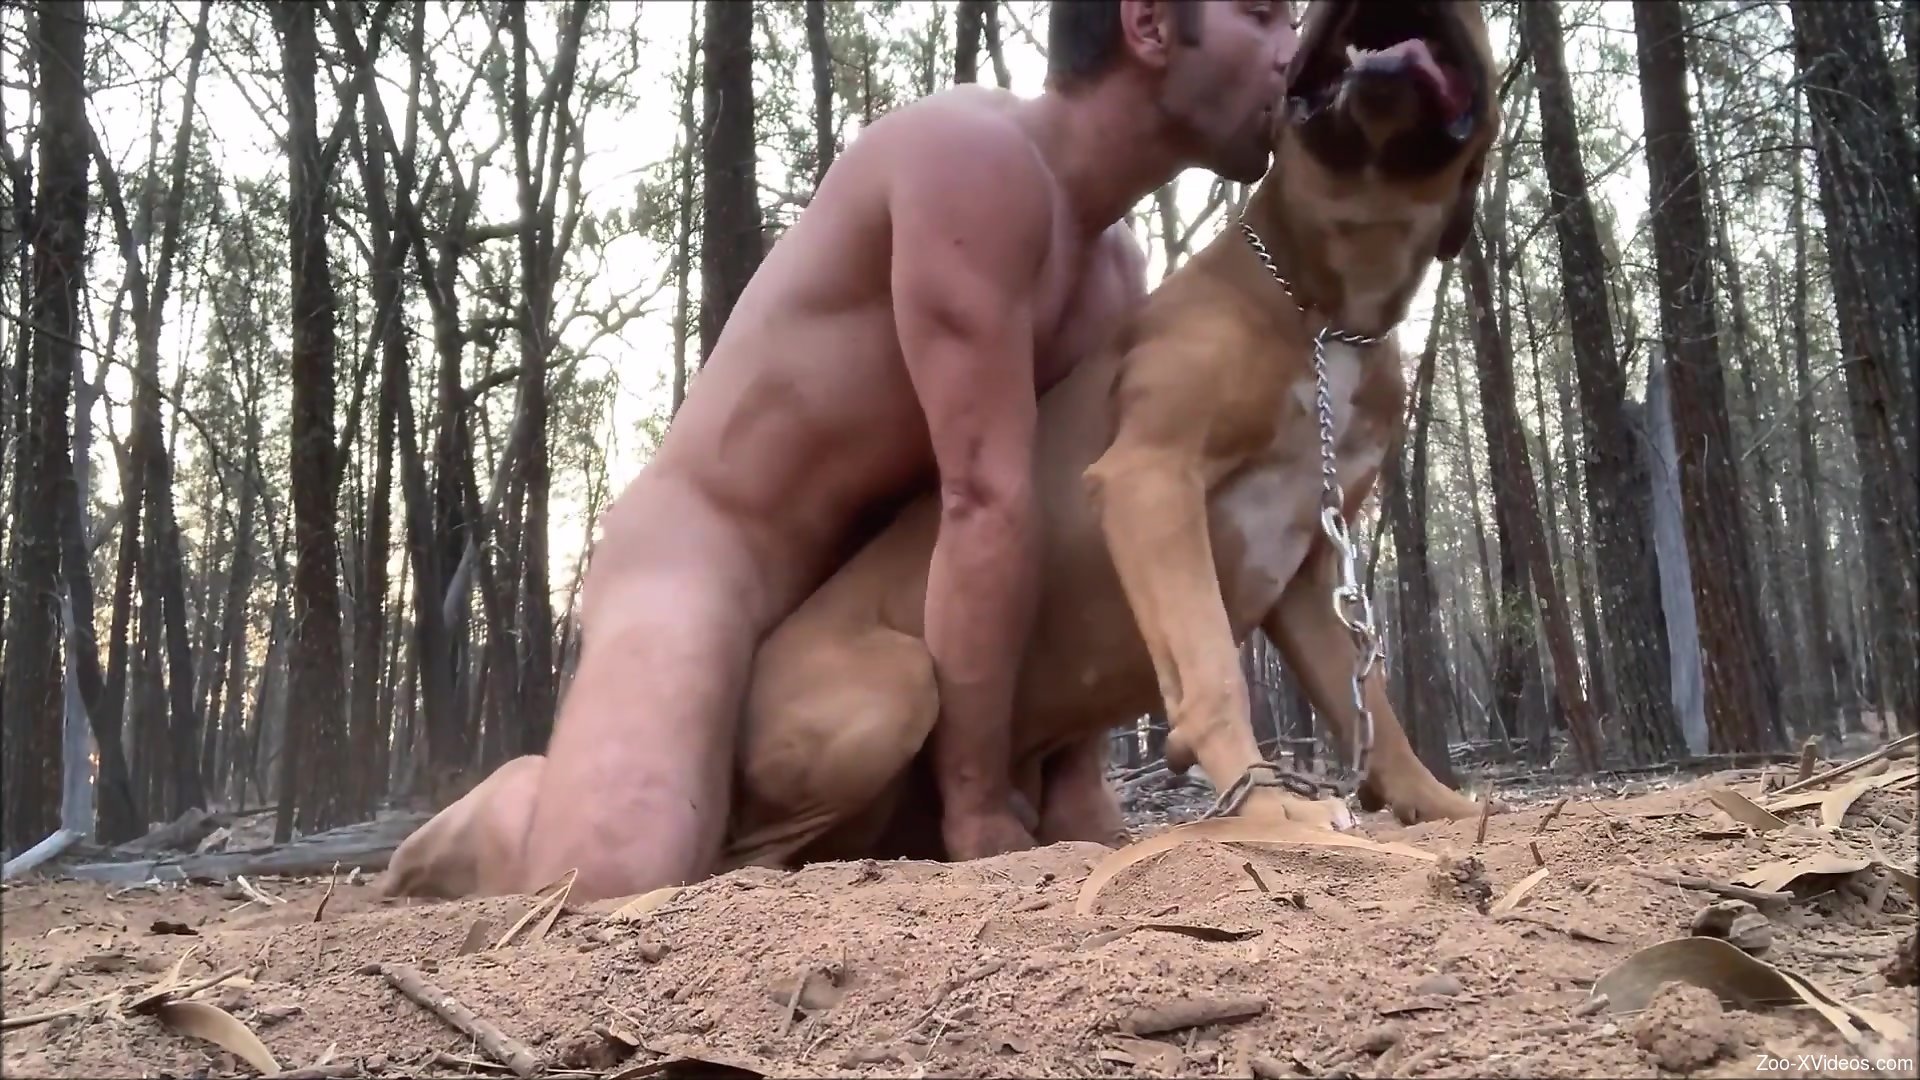 Xxx Man Dog Bf - Shredded guy fucking a sexy brown animal in the woods